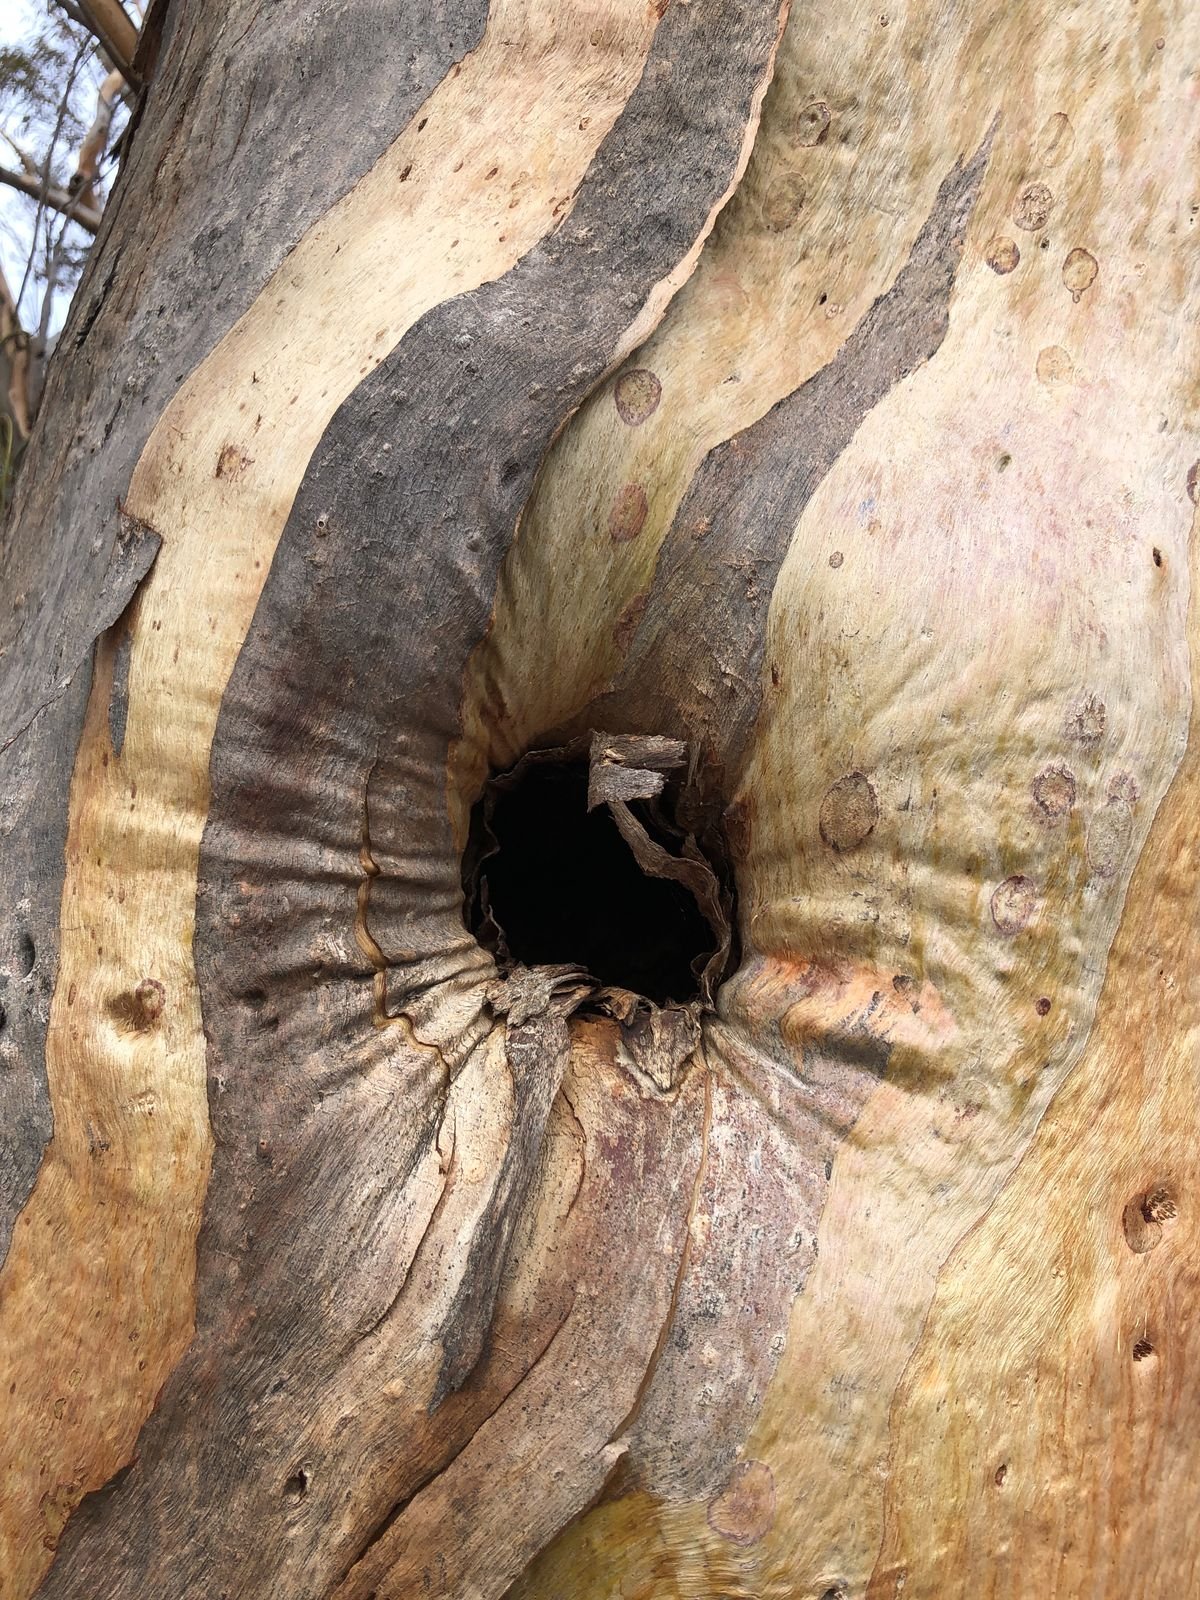 The salmon gums of Cocanarup provide hollows of all shapes and sizes - homes for many different creatures - Hollows